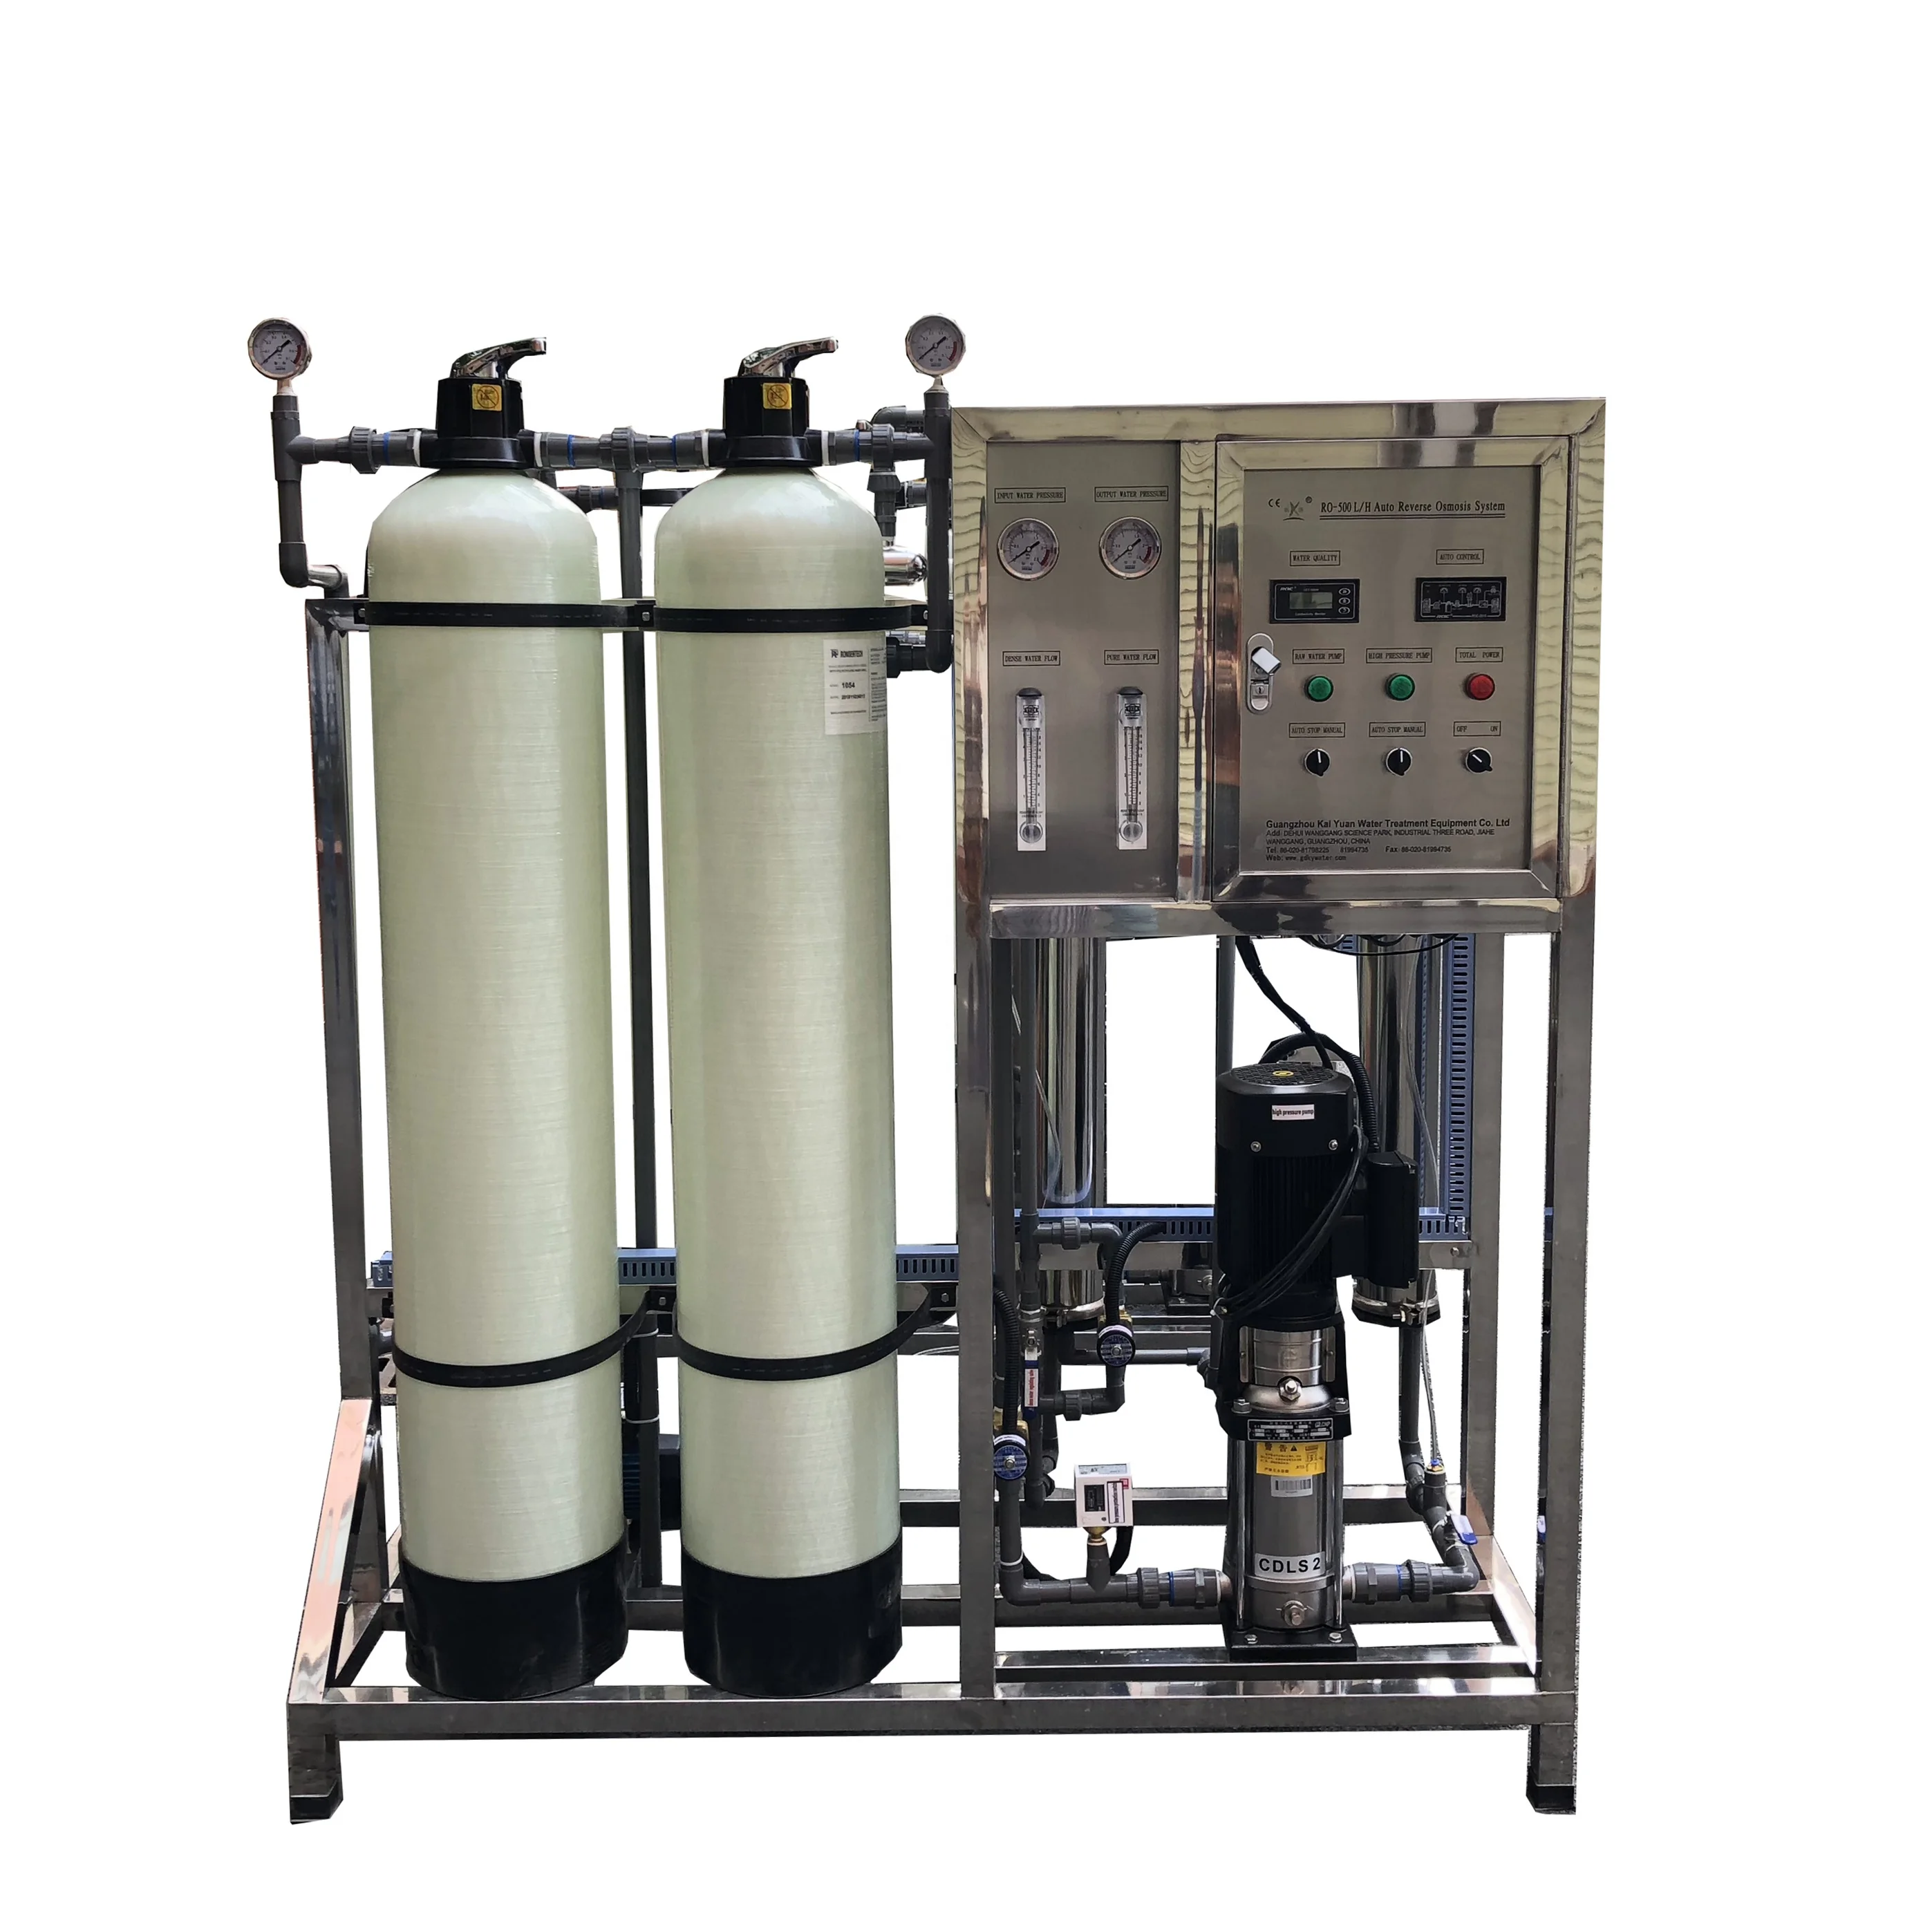 China Manufacturer 500lph Water Treatment Equipment System Reverse Osmosis  Ro Drinking Water Purification Plant - Buy Water Purification System,Water  Treatment System,Drinking Water Treatment System Product on Alibaba.com